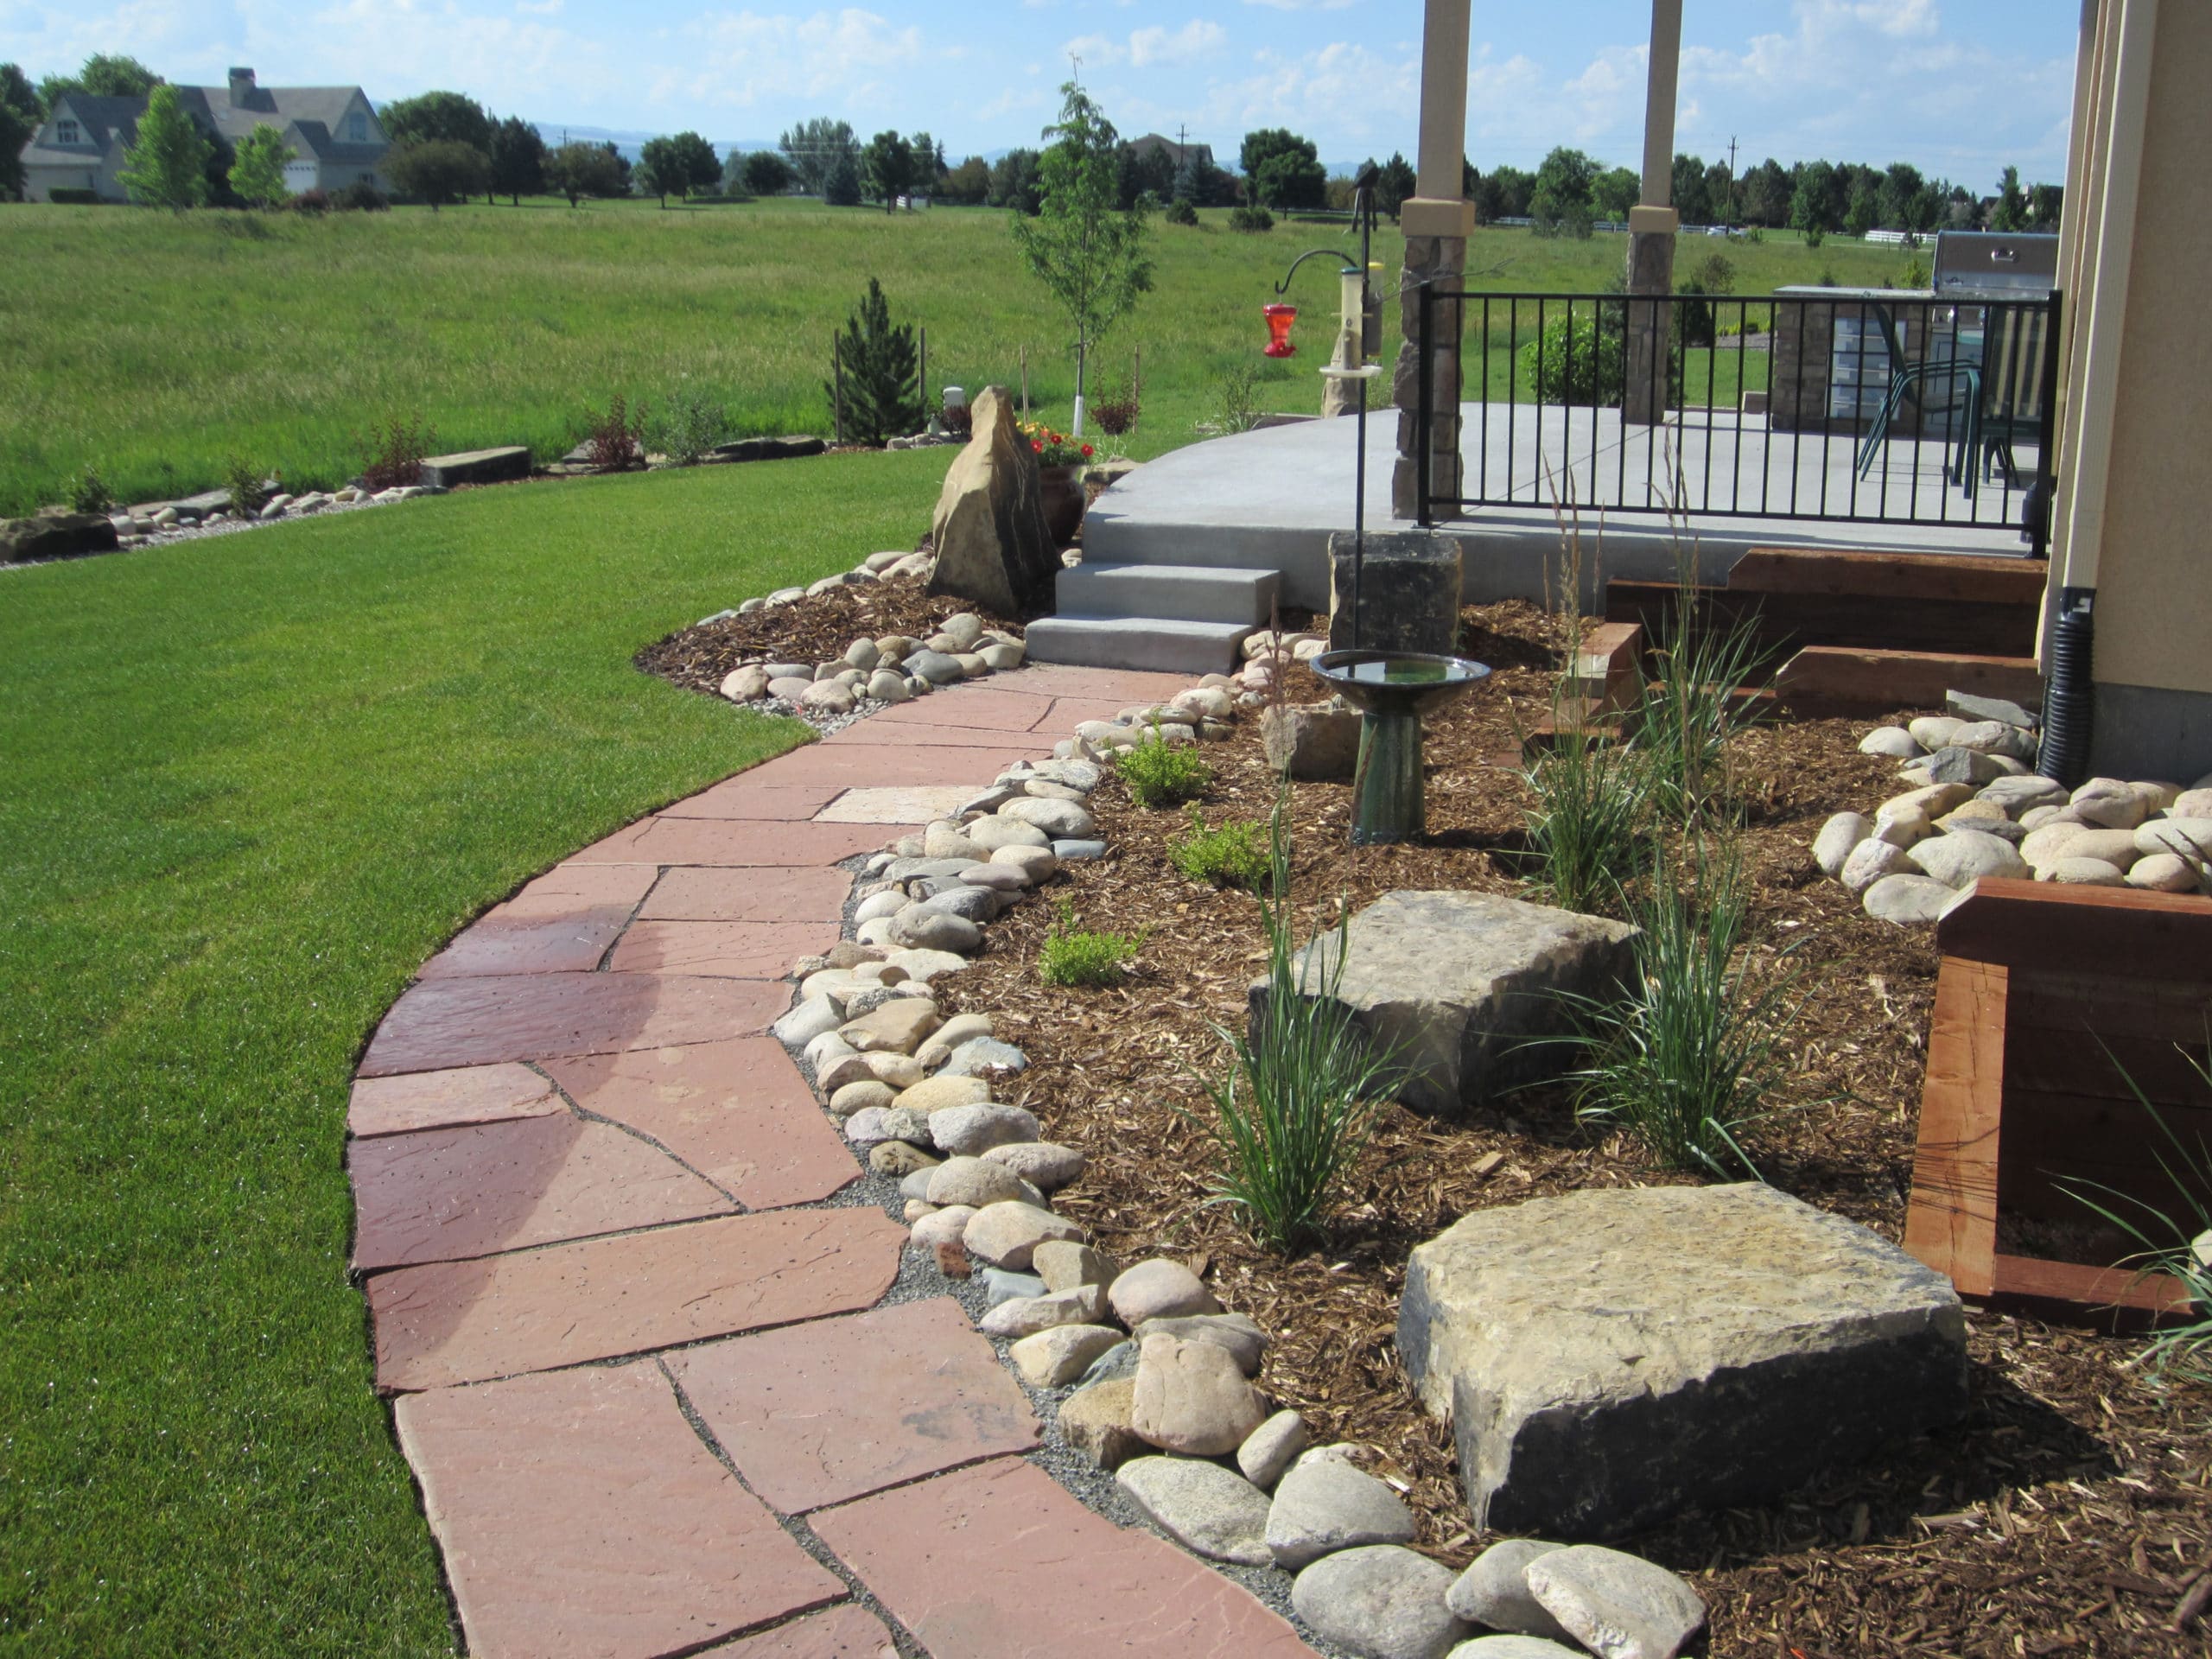 Flat stone path surrounded by green grass leading to a concrete patio.